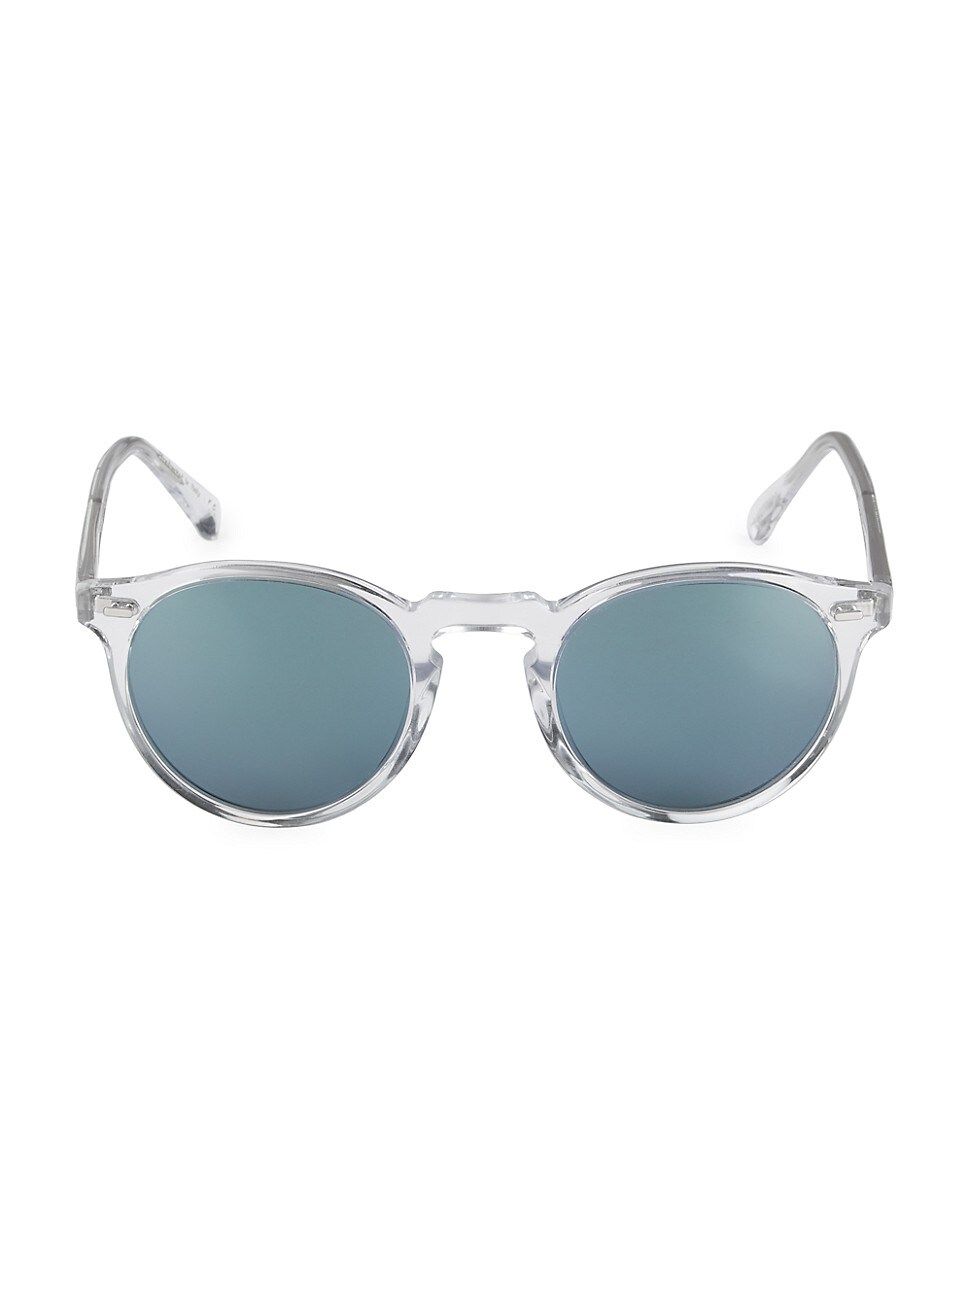 Gregory Peck 1962 58MM Round Sunglasses | Saks Fifth Avenue